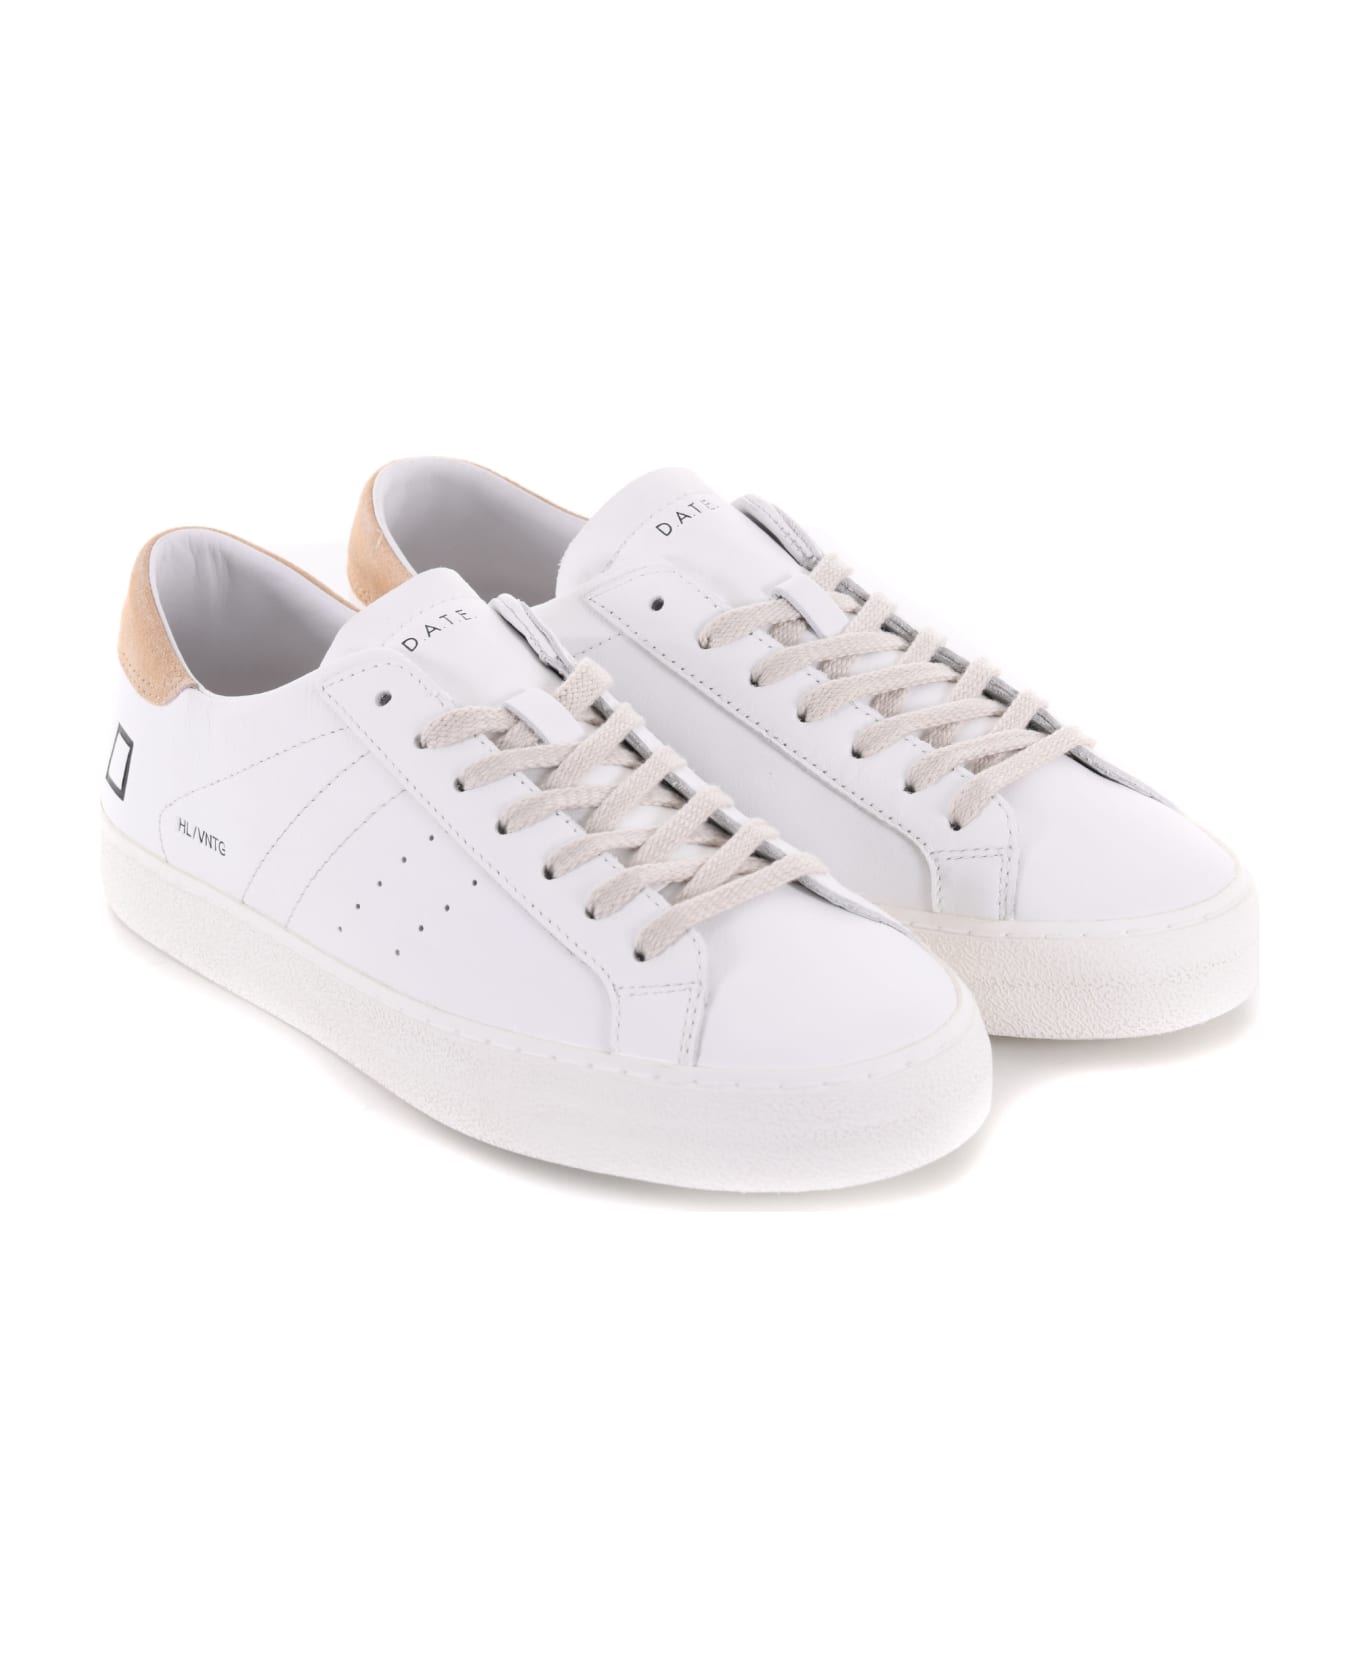 D.A.T.E. Sneakers "hill Low Calf Vintage" In Leather - Bianco/sabbia